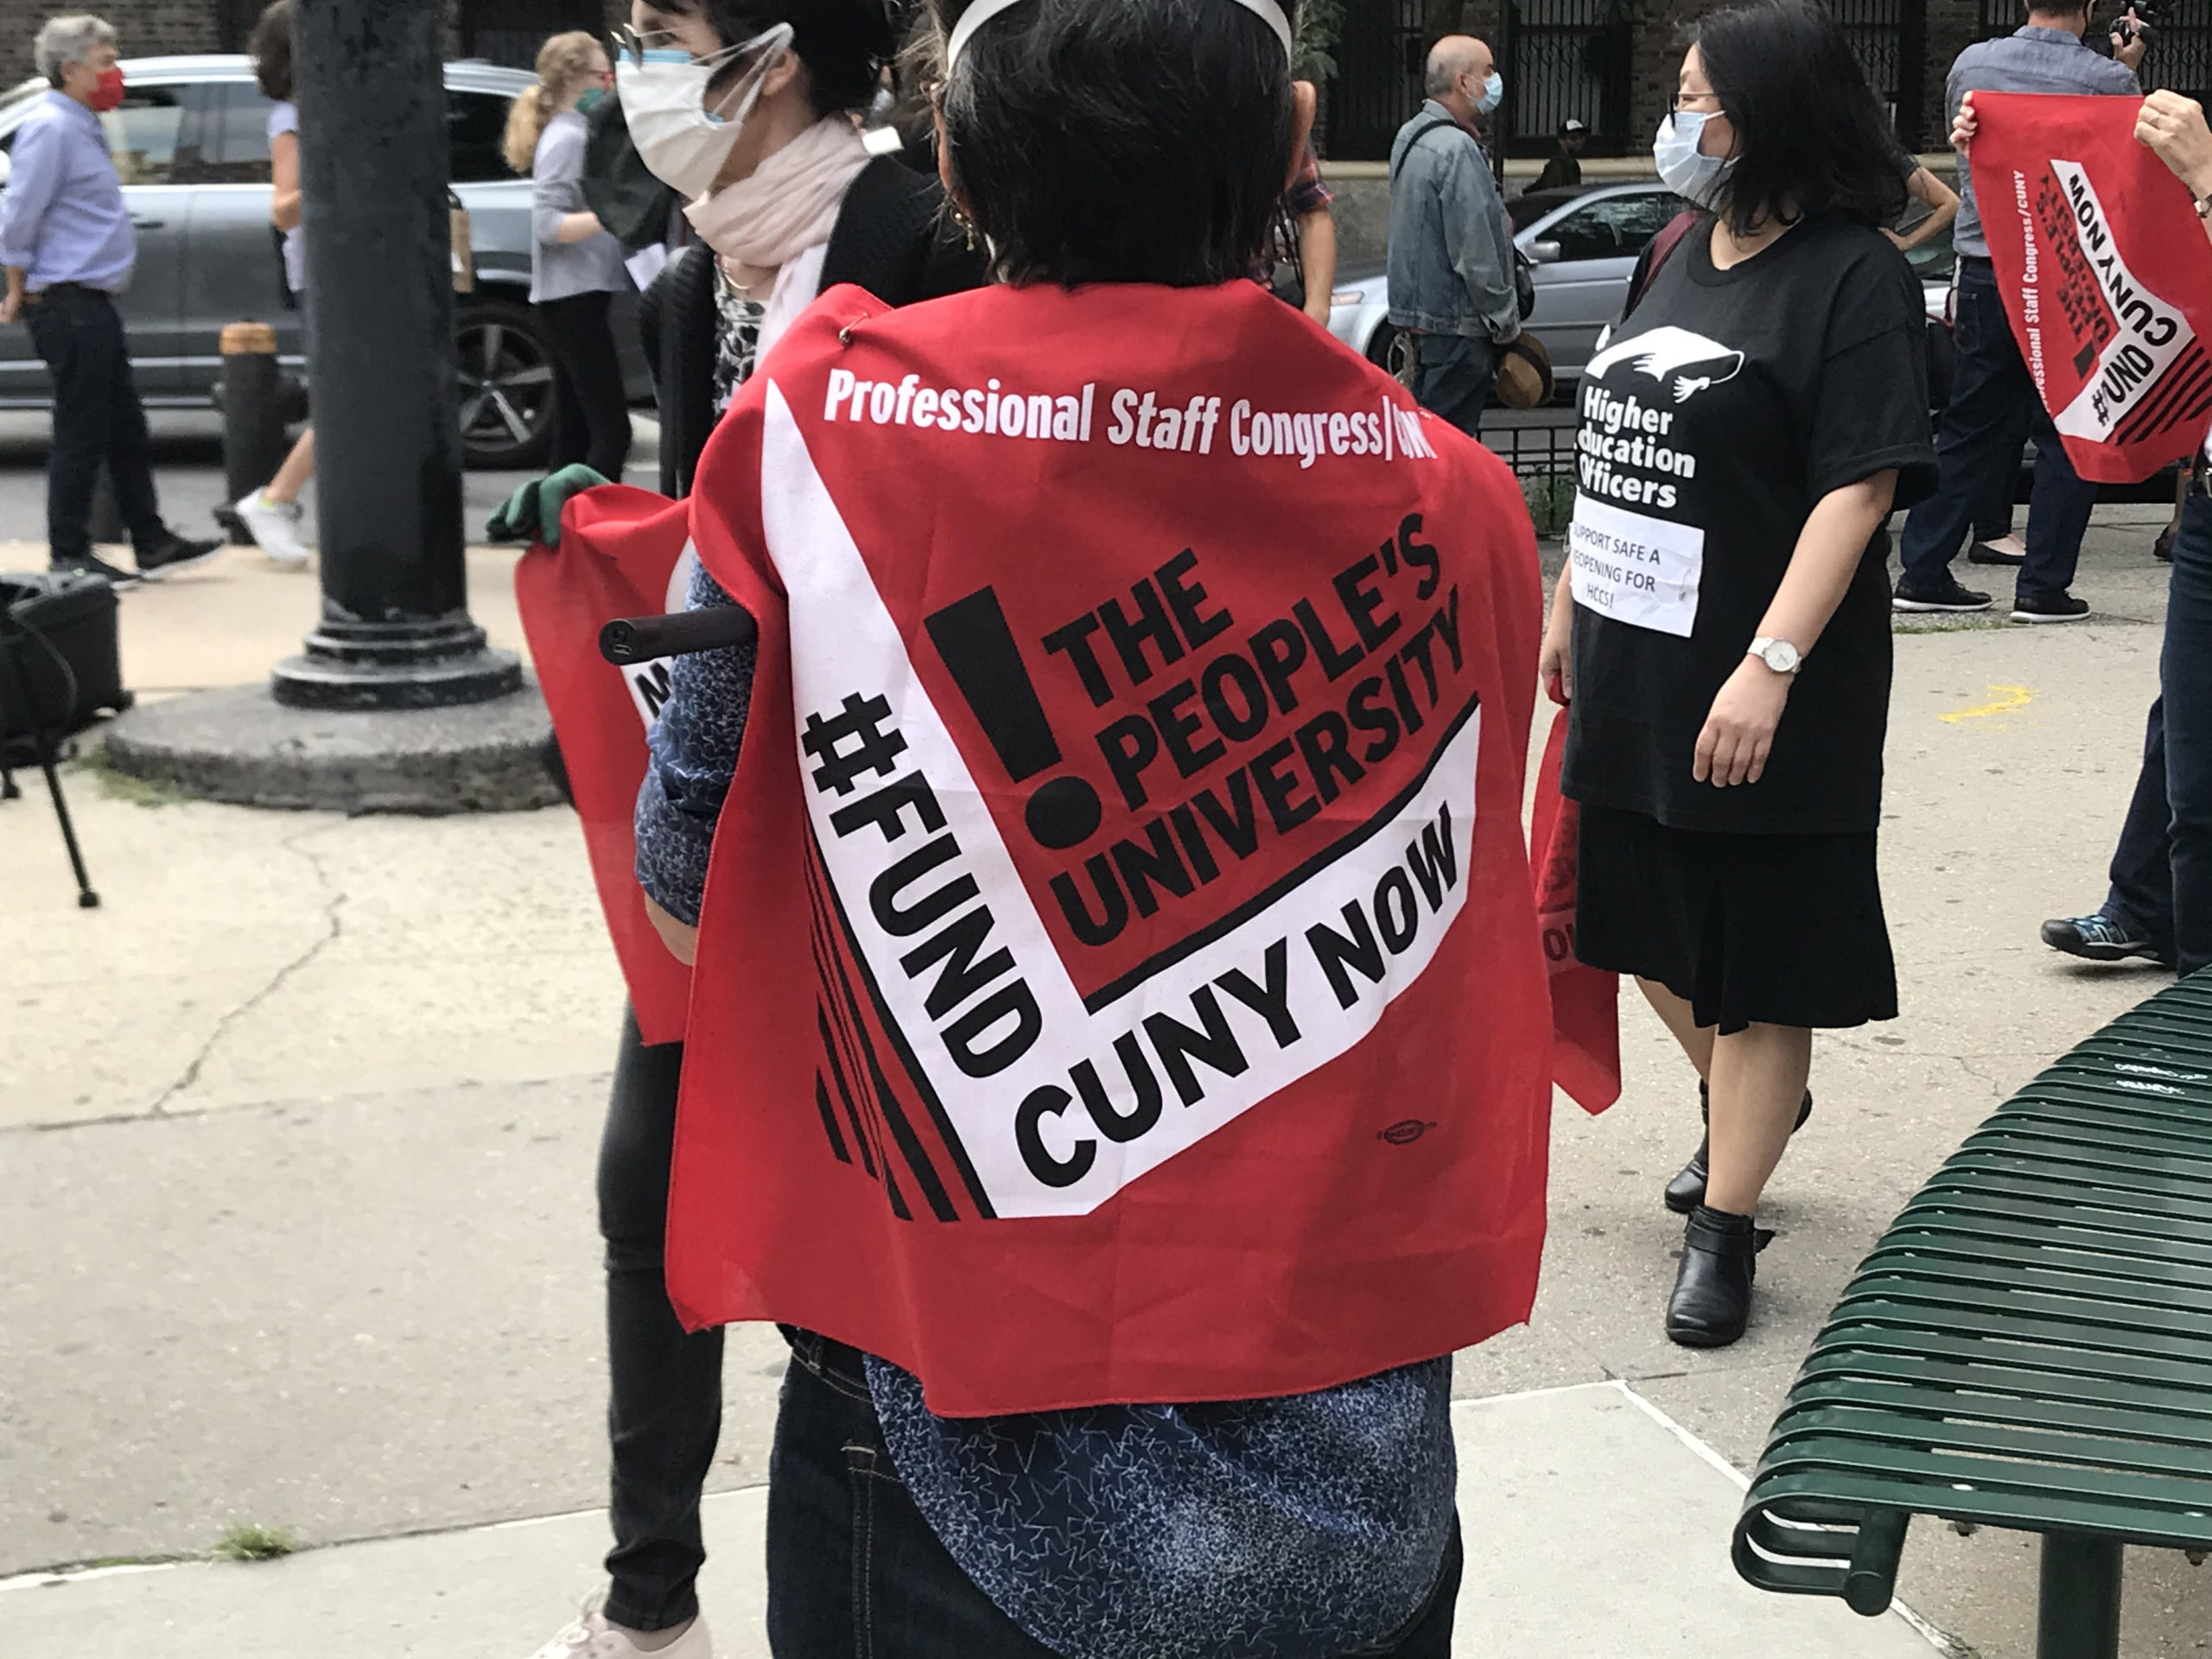 Someone with short dark hair stands with their back to the viewer. On their back, they are wearing a piece of red cloth that says "Professional Staff Congress. The People's University. #FundCUNYNow!" In the background, there are other people marching and carrying similar signs.